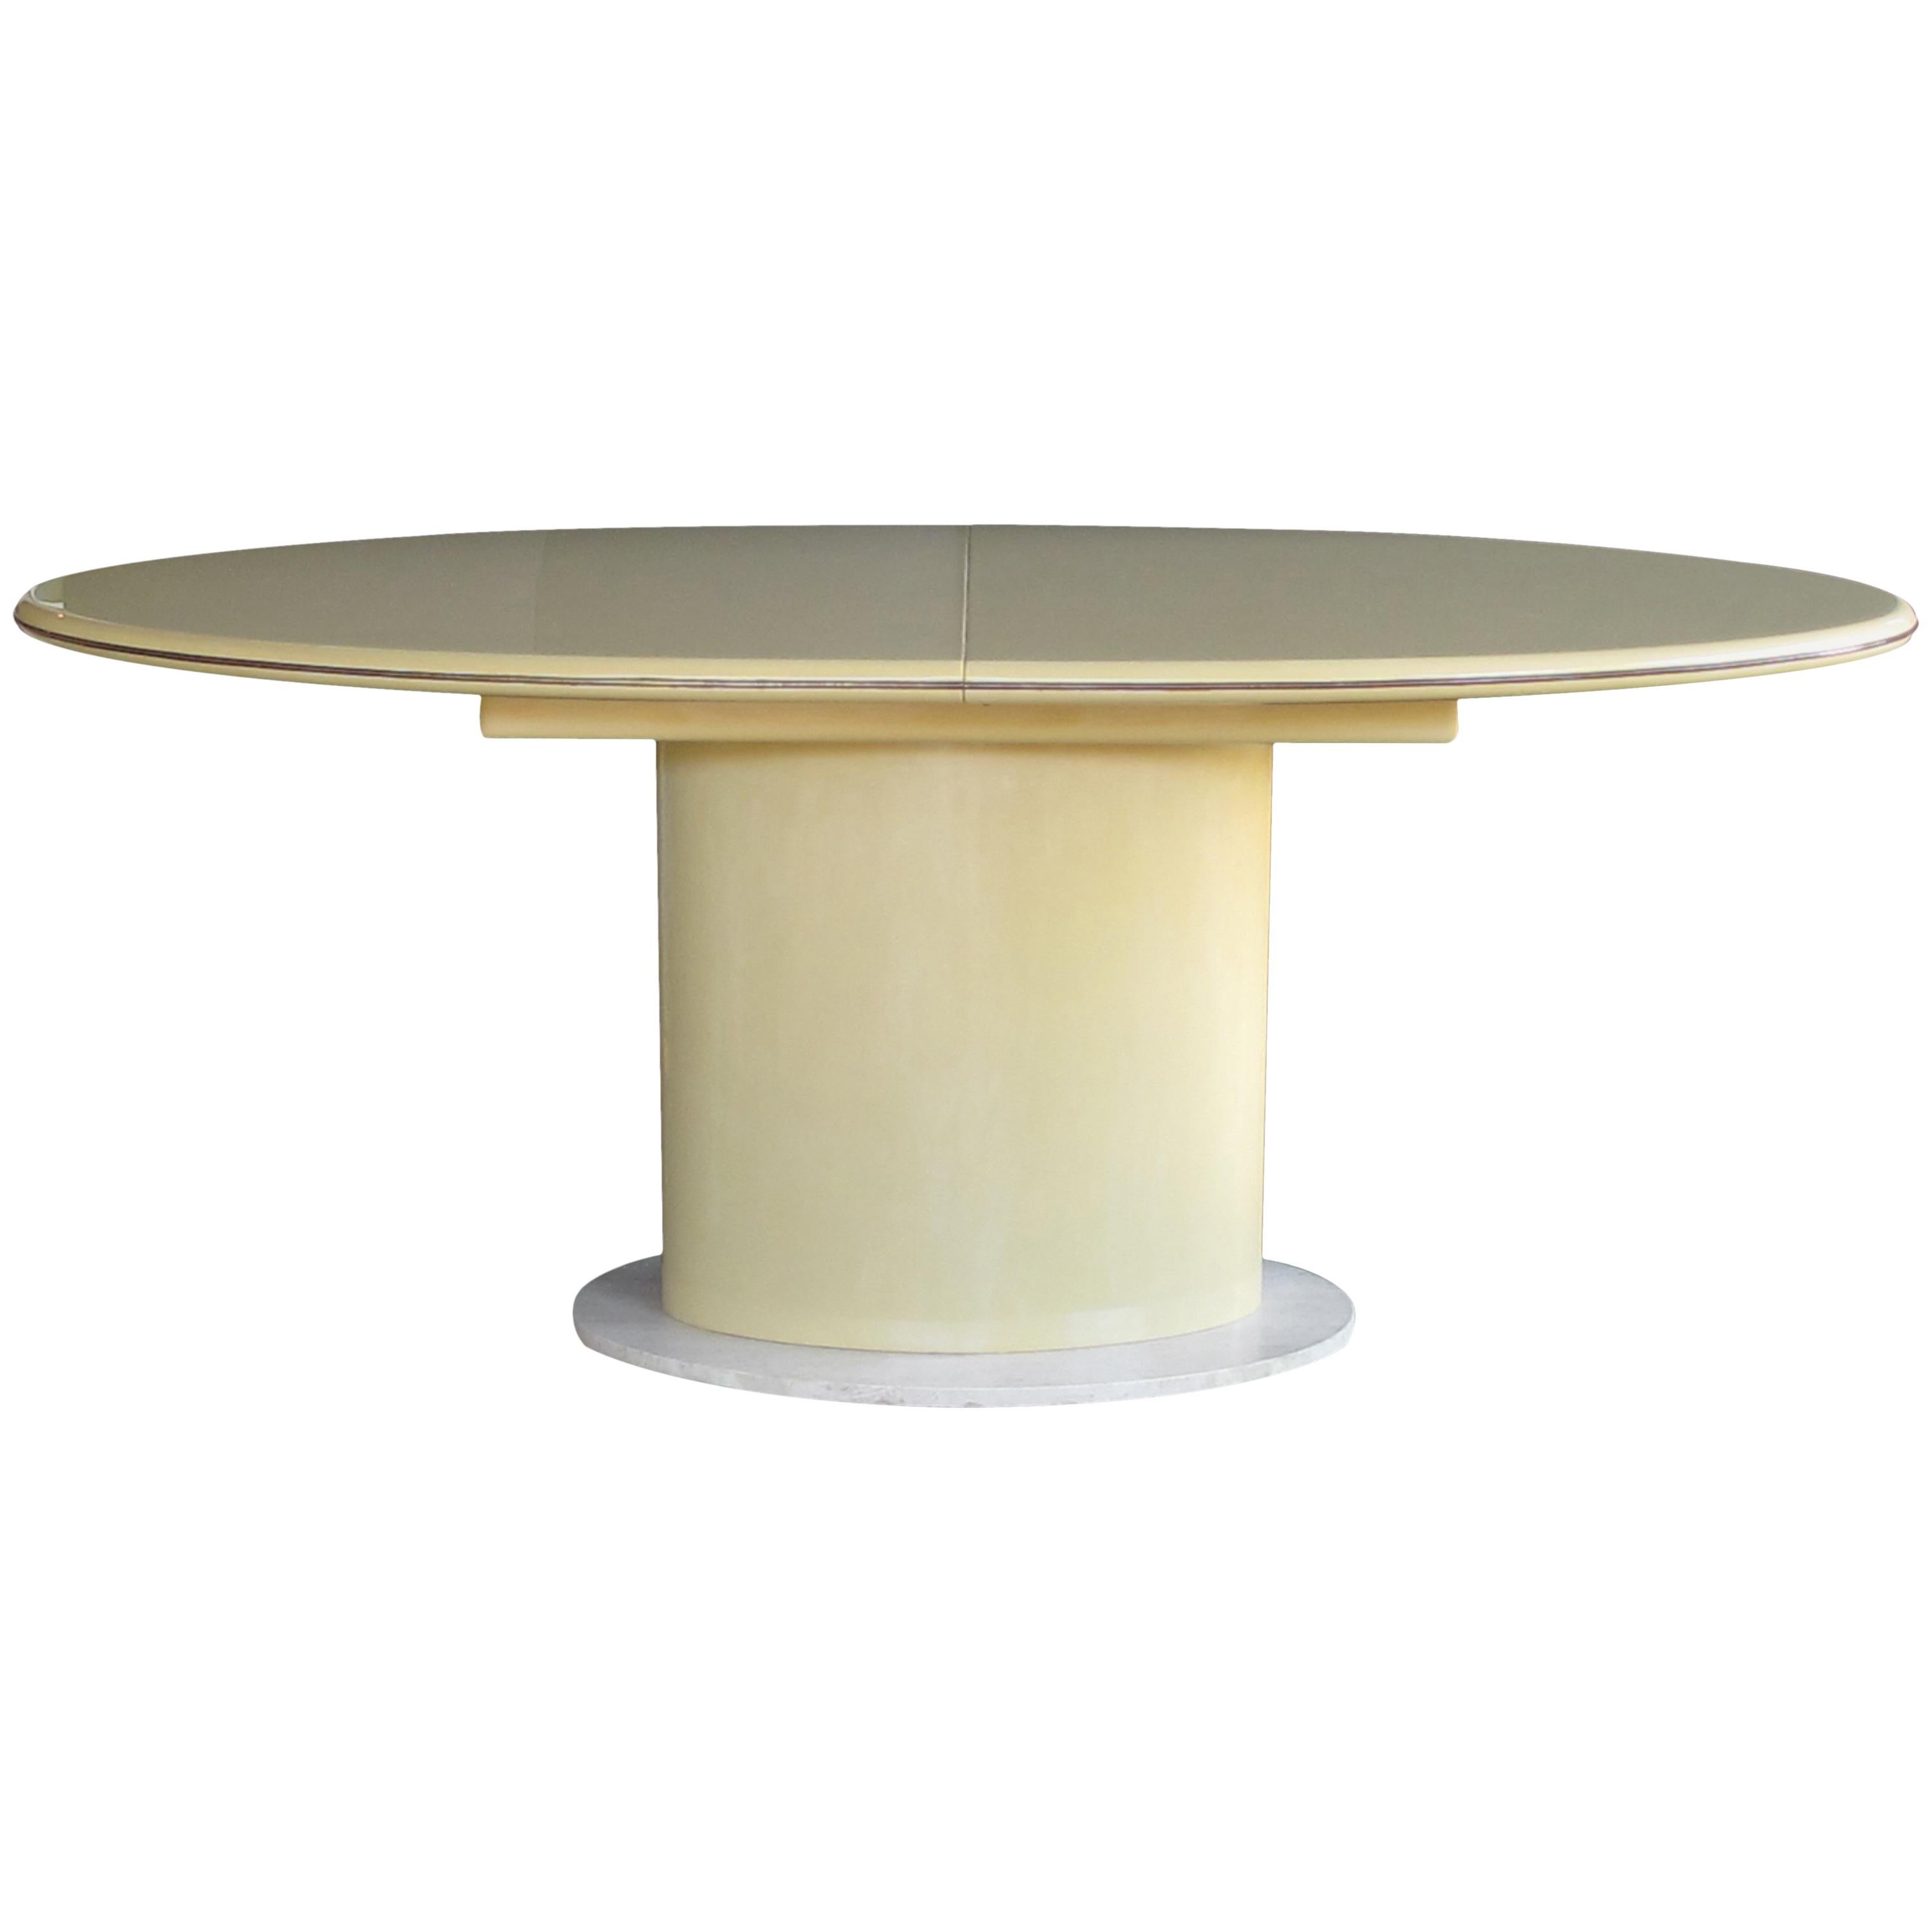 Good Quality and Sleek American 1970s Lacquered Oval Dining Table